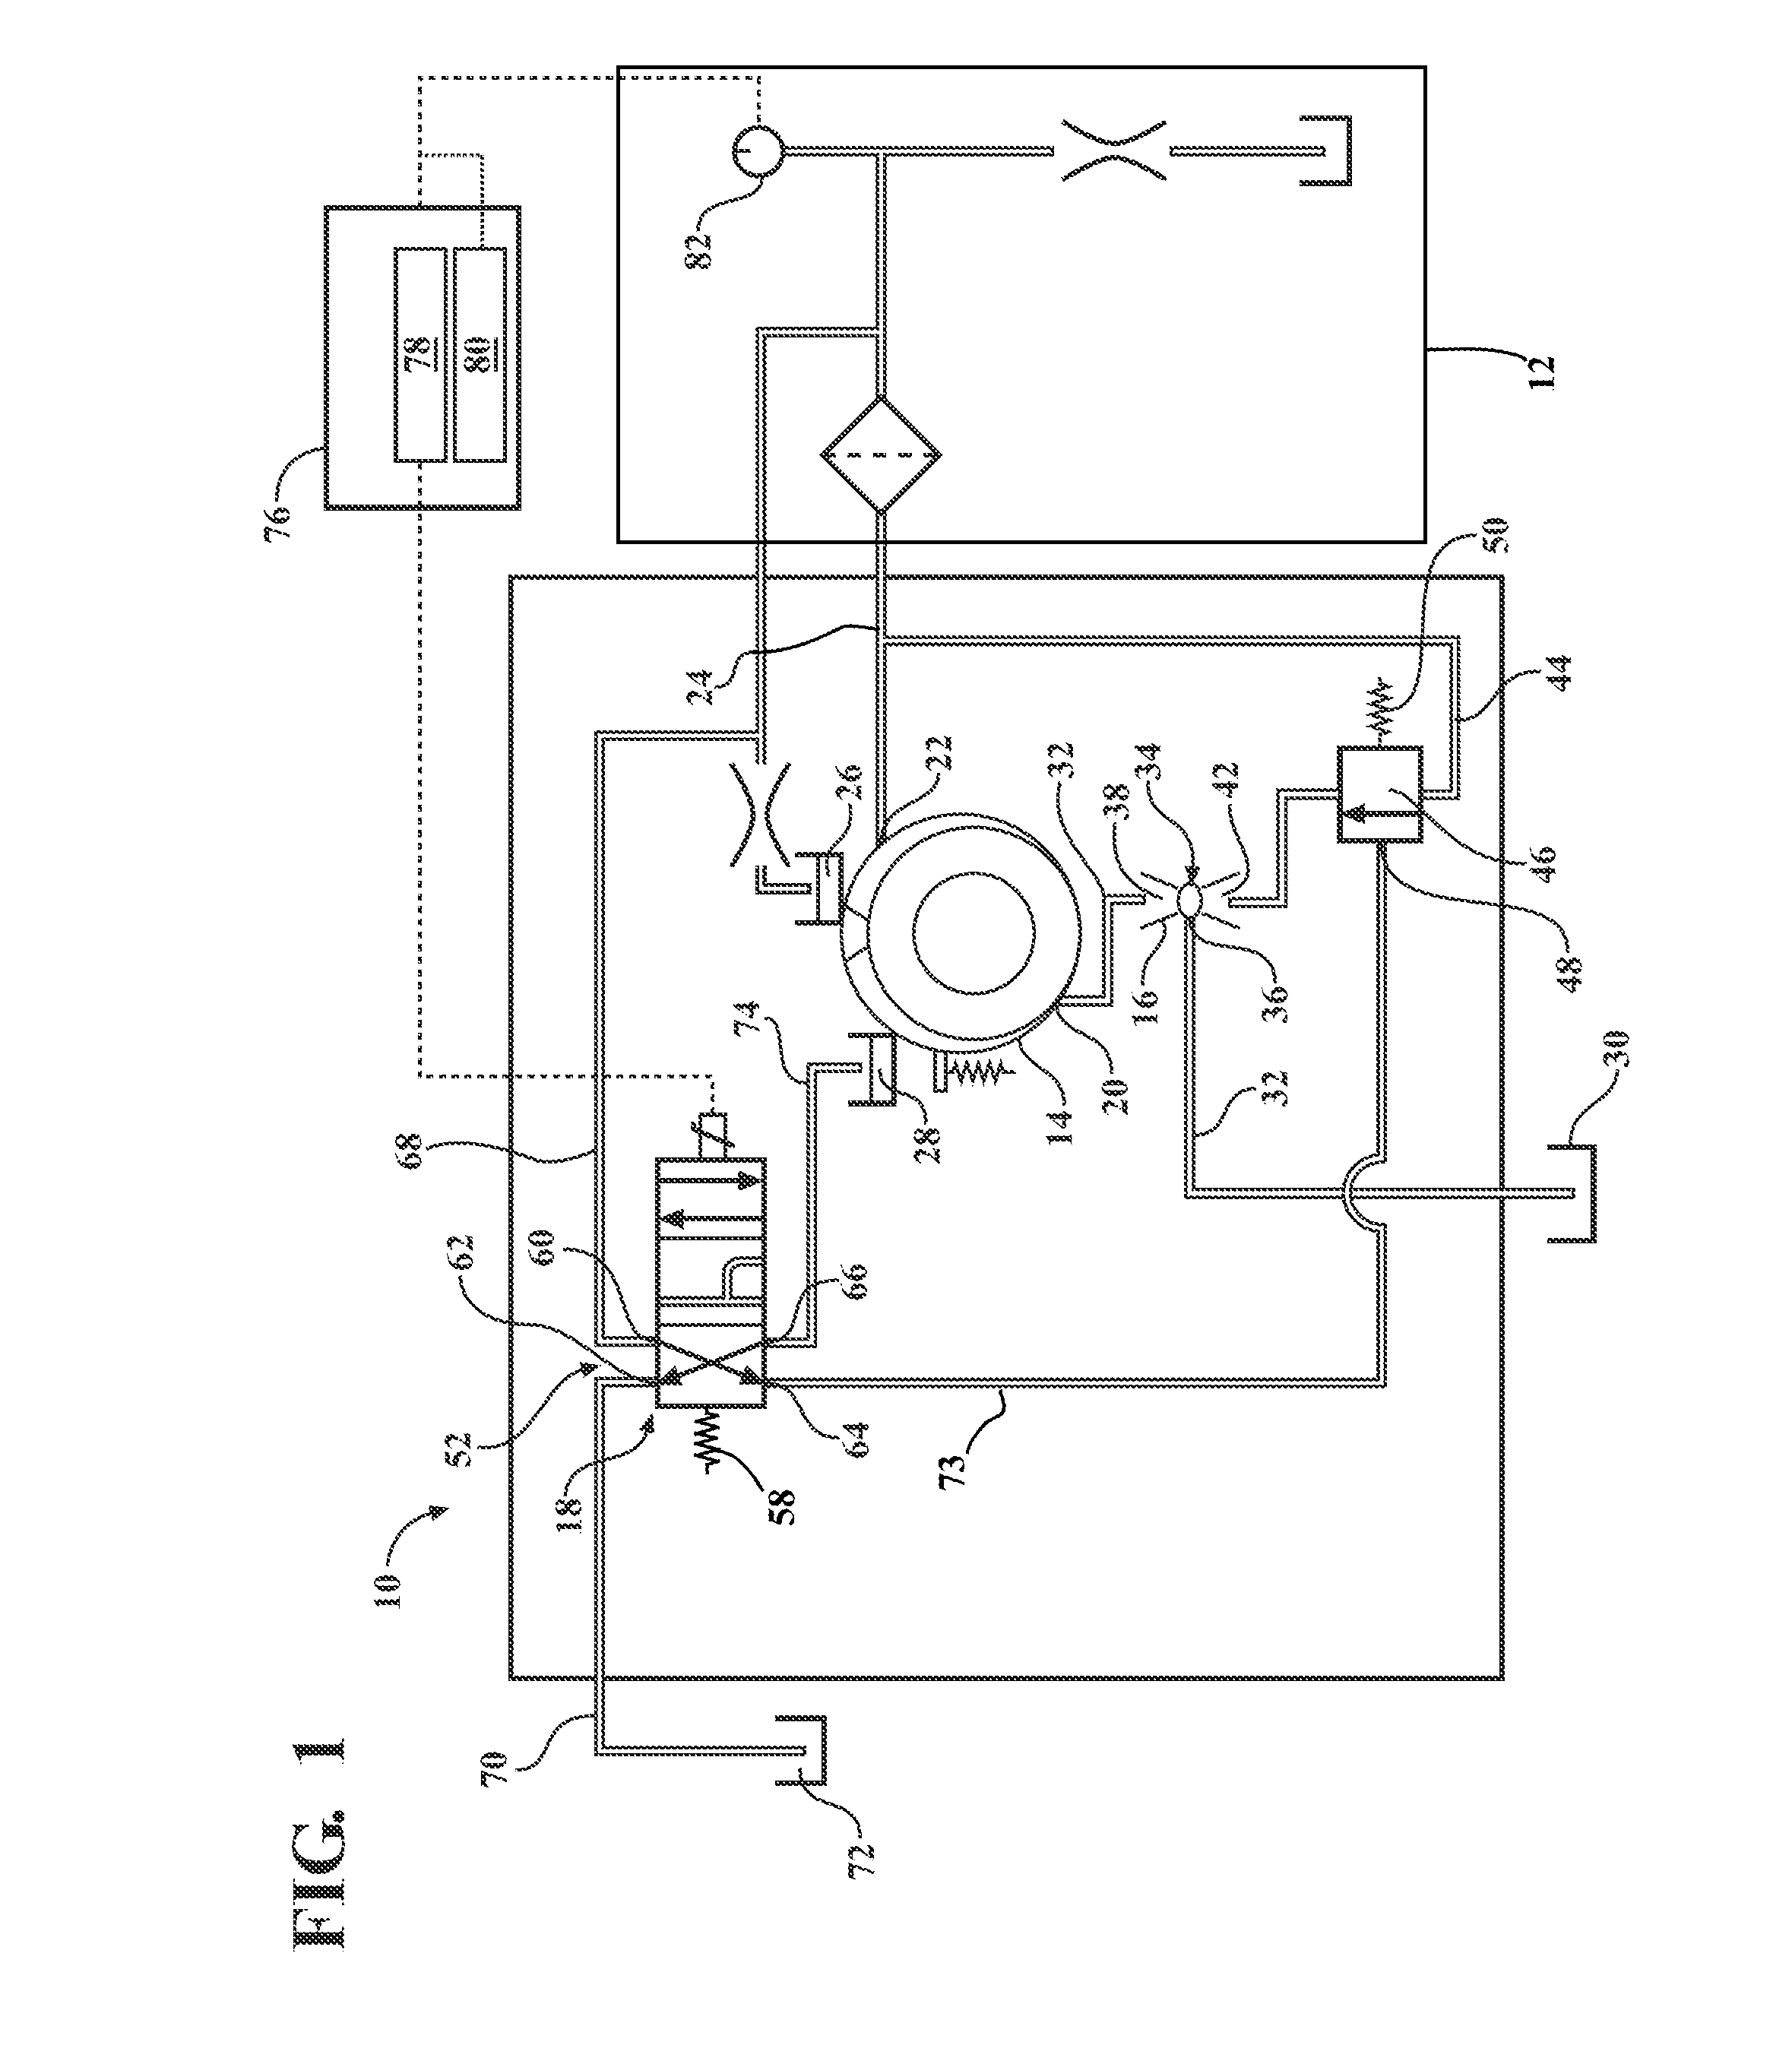 Lubrication system and method configured for supplying pressurized oil to an engine